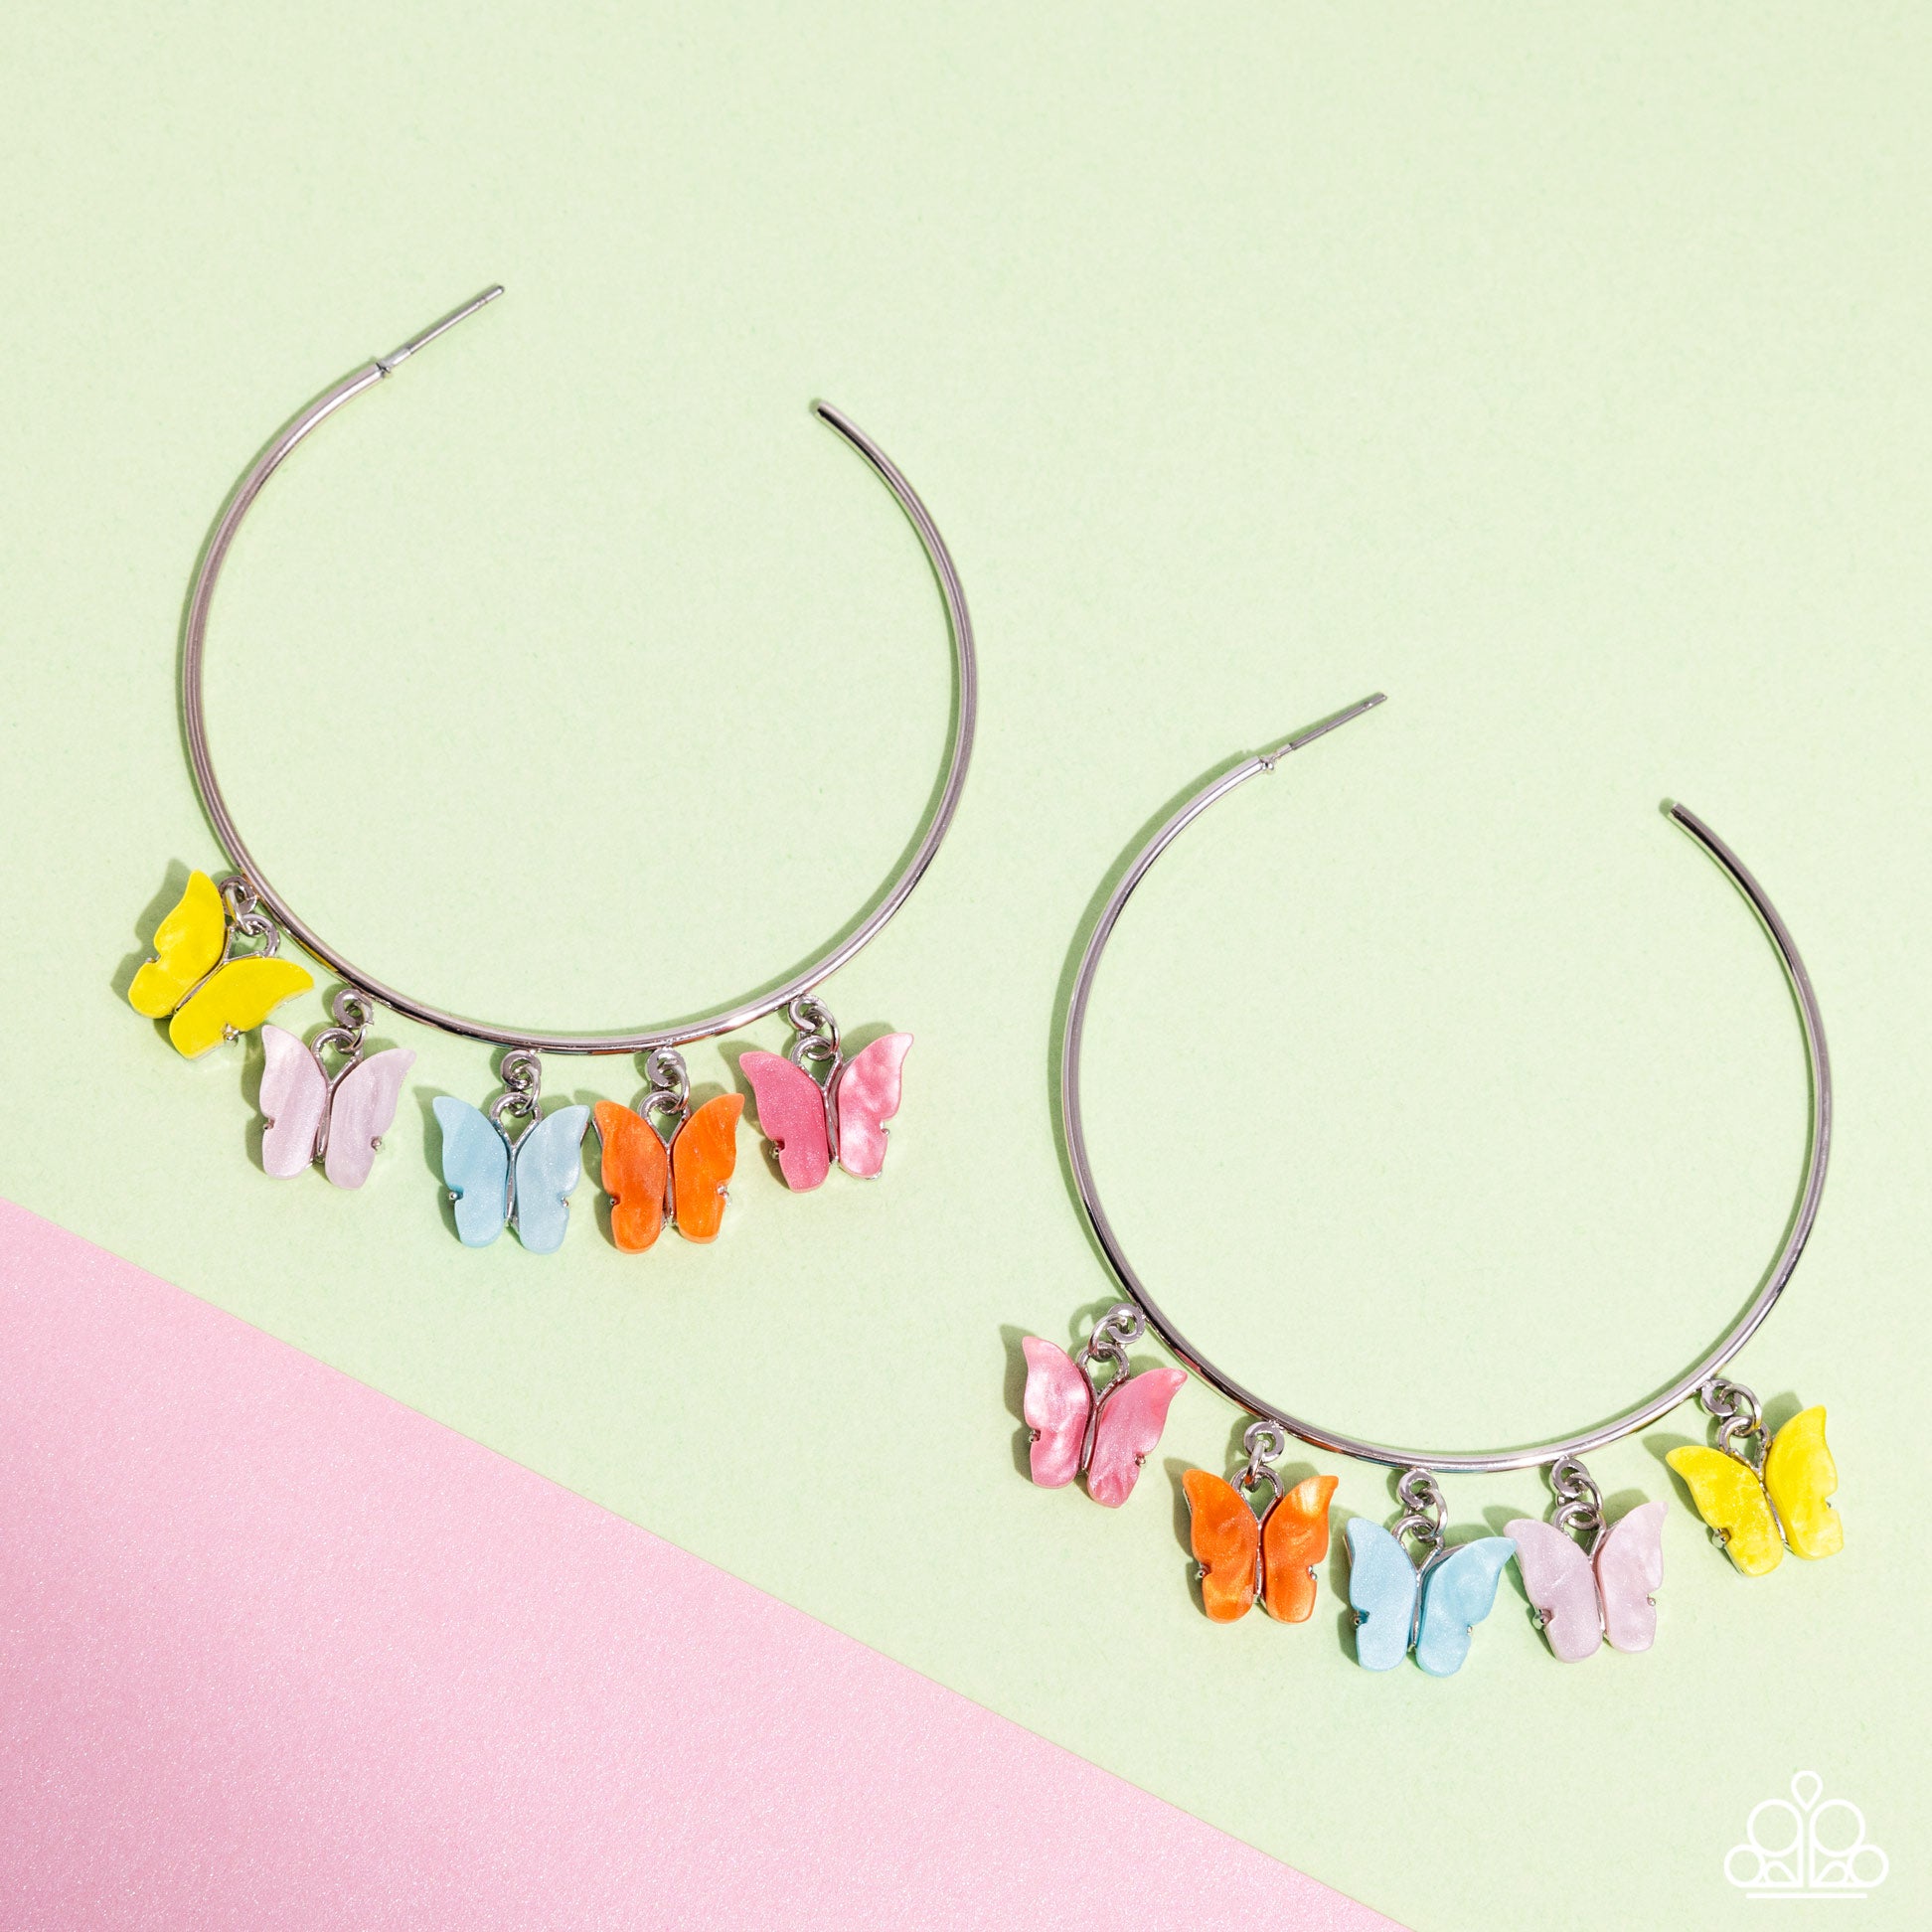 Bemusing Butterflies Multi Hoop Earring - Paparazzi Accessories Attached along an oversized silver hoop, a collection of different colored butterflies flutter and fly along the ear for a whimsical finish. Earring attaches to a standard post fitting. Hoop measures approximately 2 1/4" in diameter. Pattern of colors may vary. Sold as one pair of hoop earrings. P5HO-MTXX-104XX